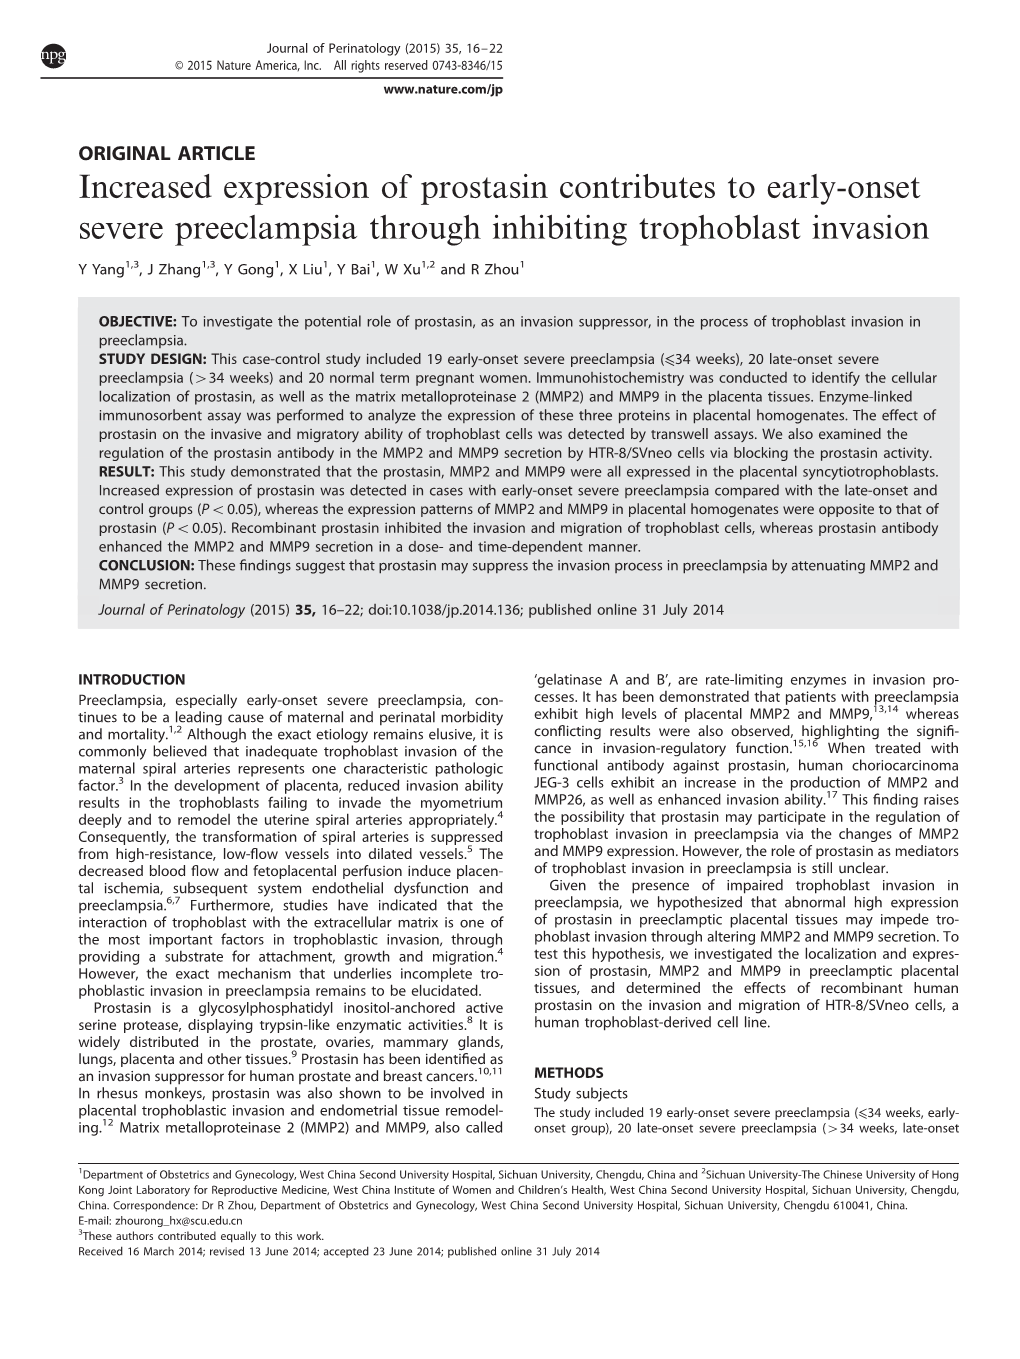 Increased Expression of Prostasin Contributes to Early-Onset Severe Preeclampsia Through Inhibiting Trophoblast Invasion